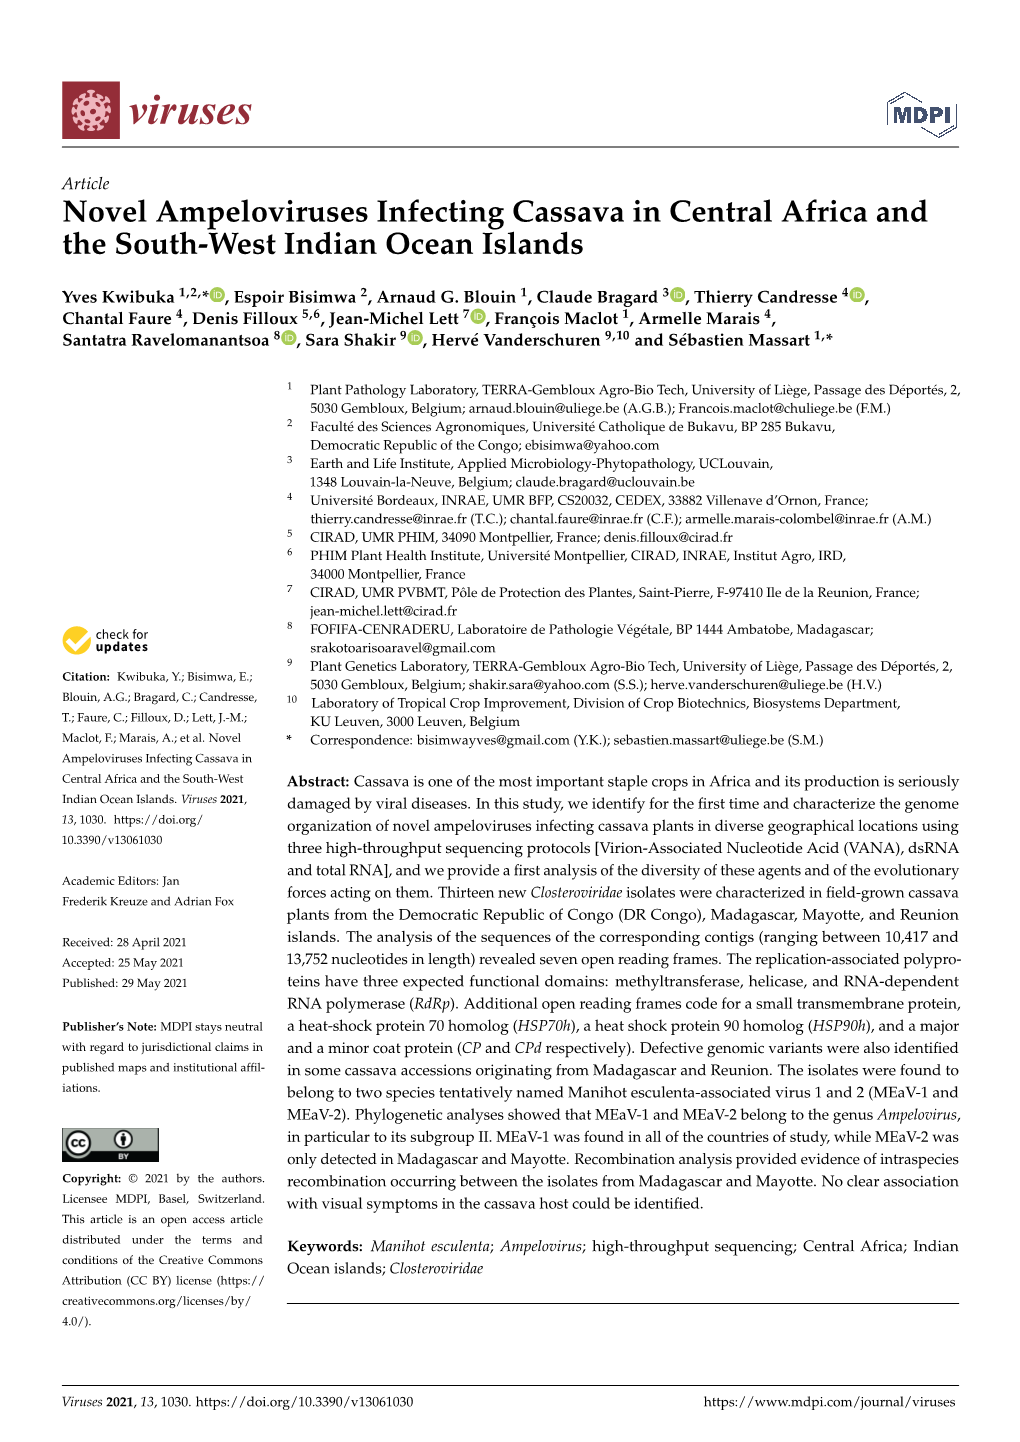 Novel Ampeloviruses Infecting Cassava in Central Africa and the South-West Indian Ocean Islands